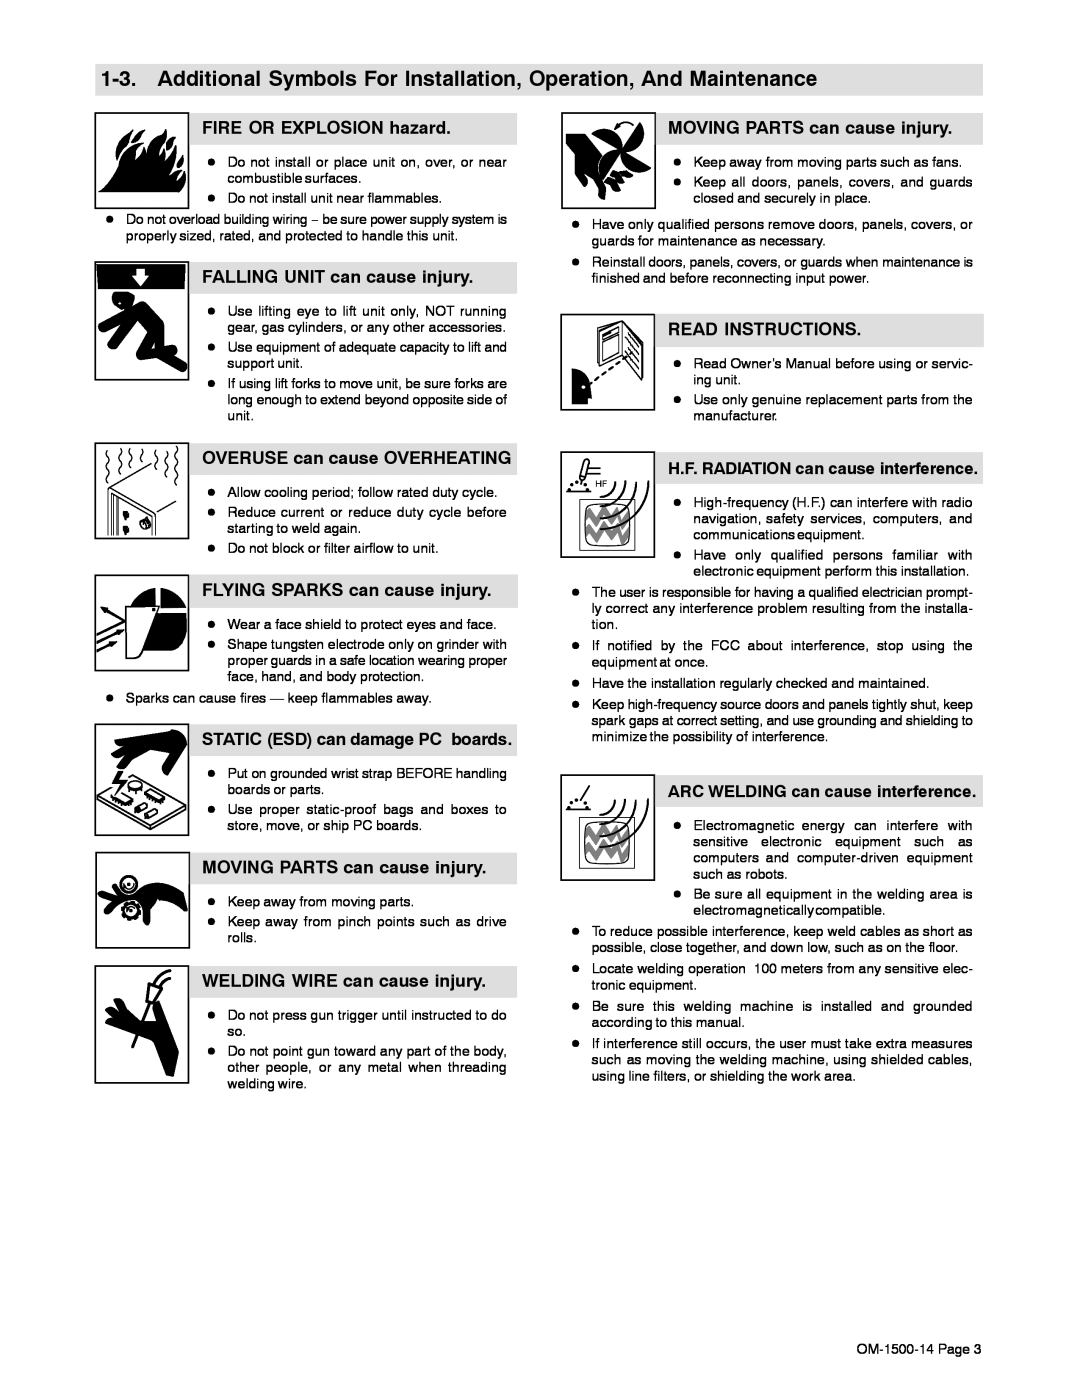 Miller Electric and DS-74DX16 Additional Symbols For Installation, Operation, And Maintenance, FIRE OR EXPLOSION hazard 